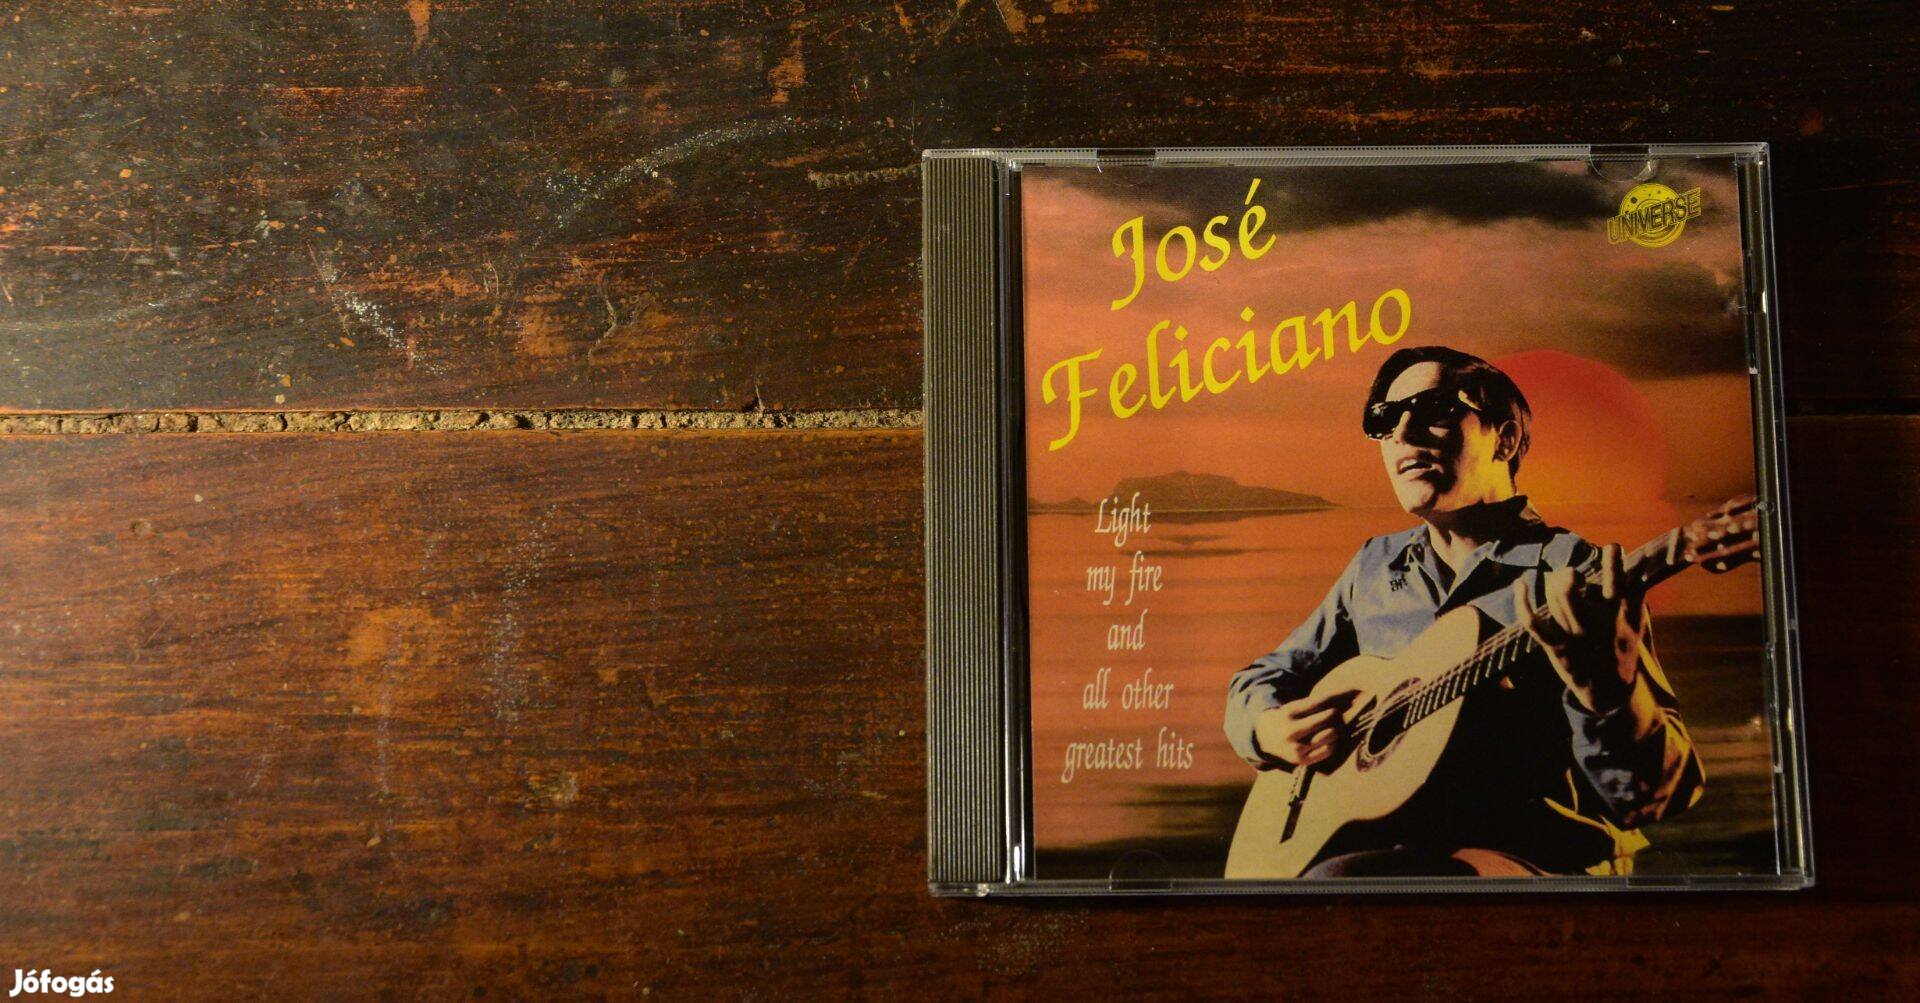 CD José Feliciano Light my fire and all other greatest hits